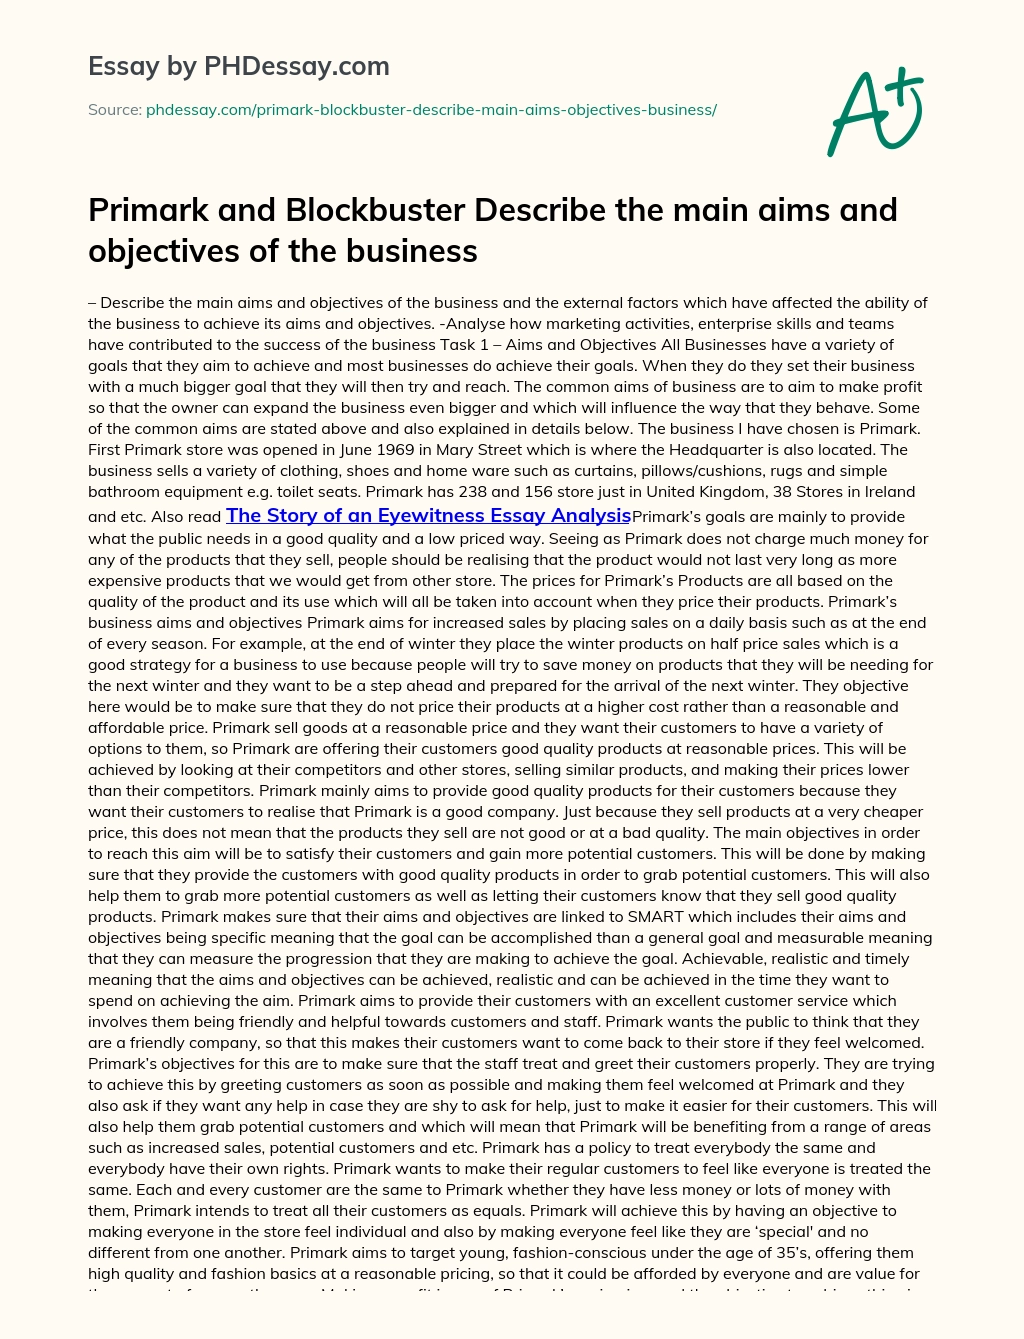 Primark and Blockbuster Describe the main aims and objectives of the business essay